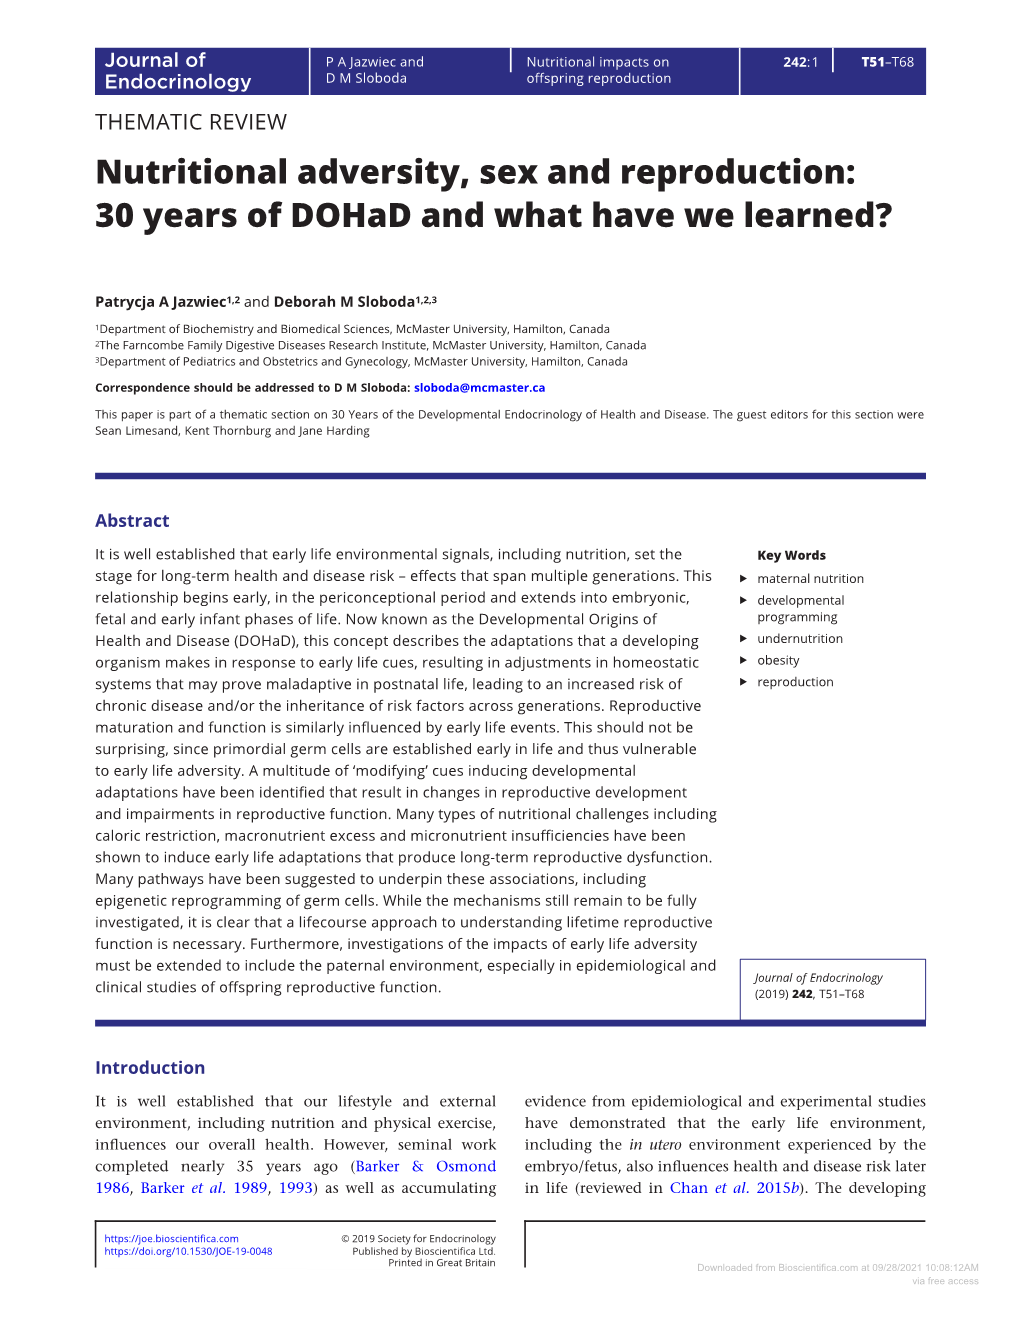 Nutritional Adversity, Sex and Reproduction: 30 Years of Dohad and What Have We Learned?